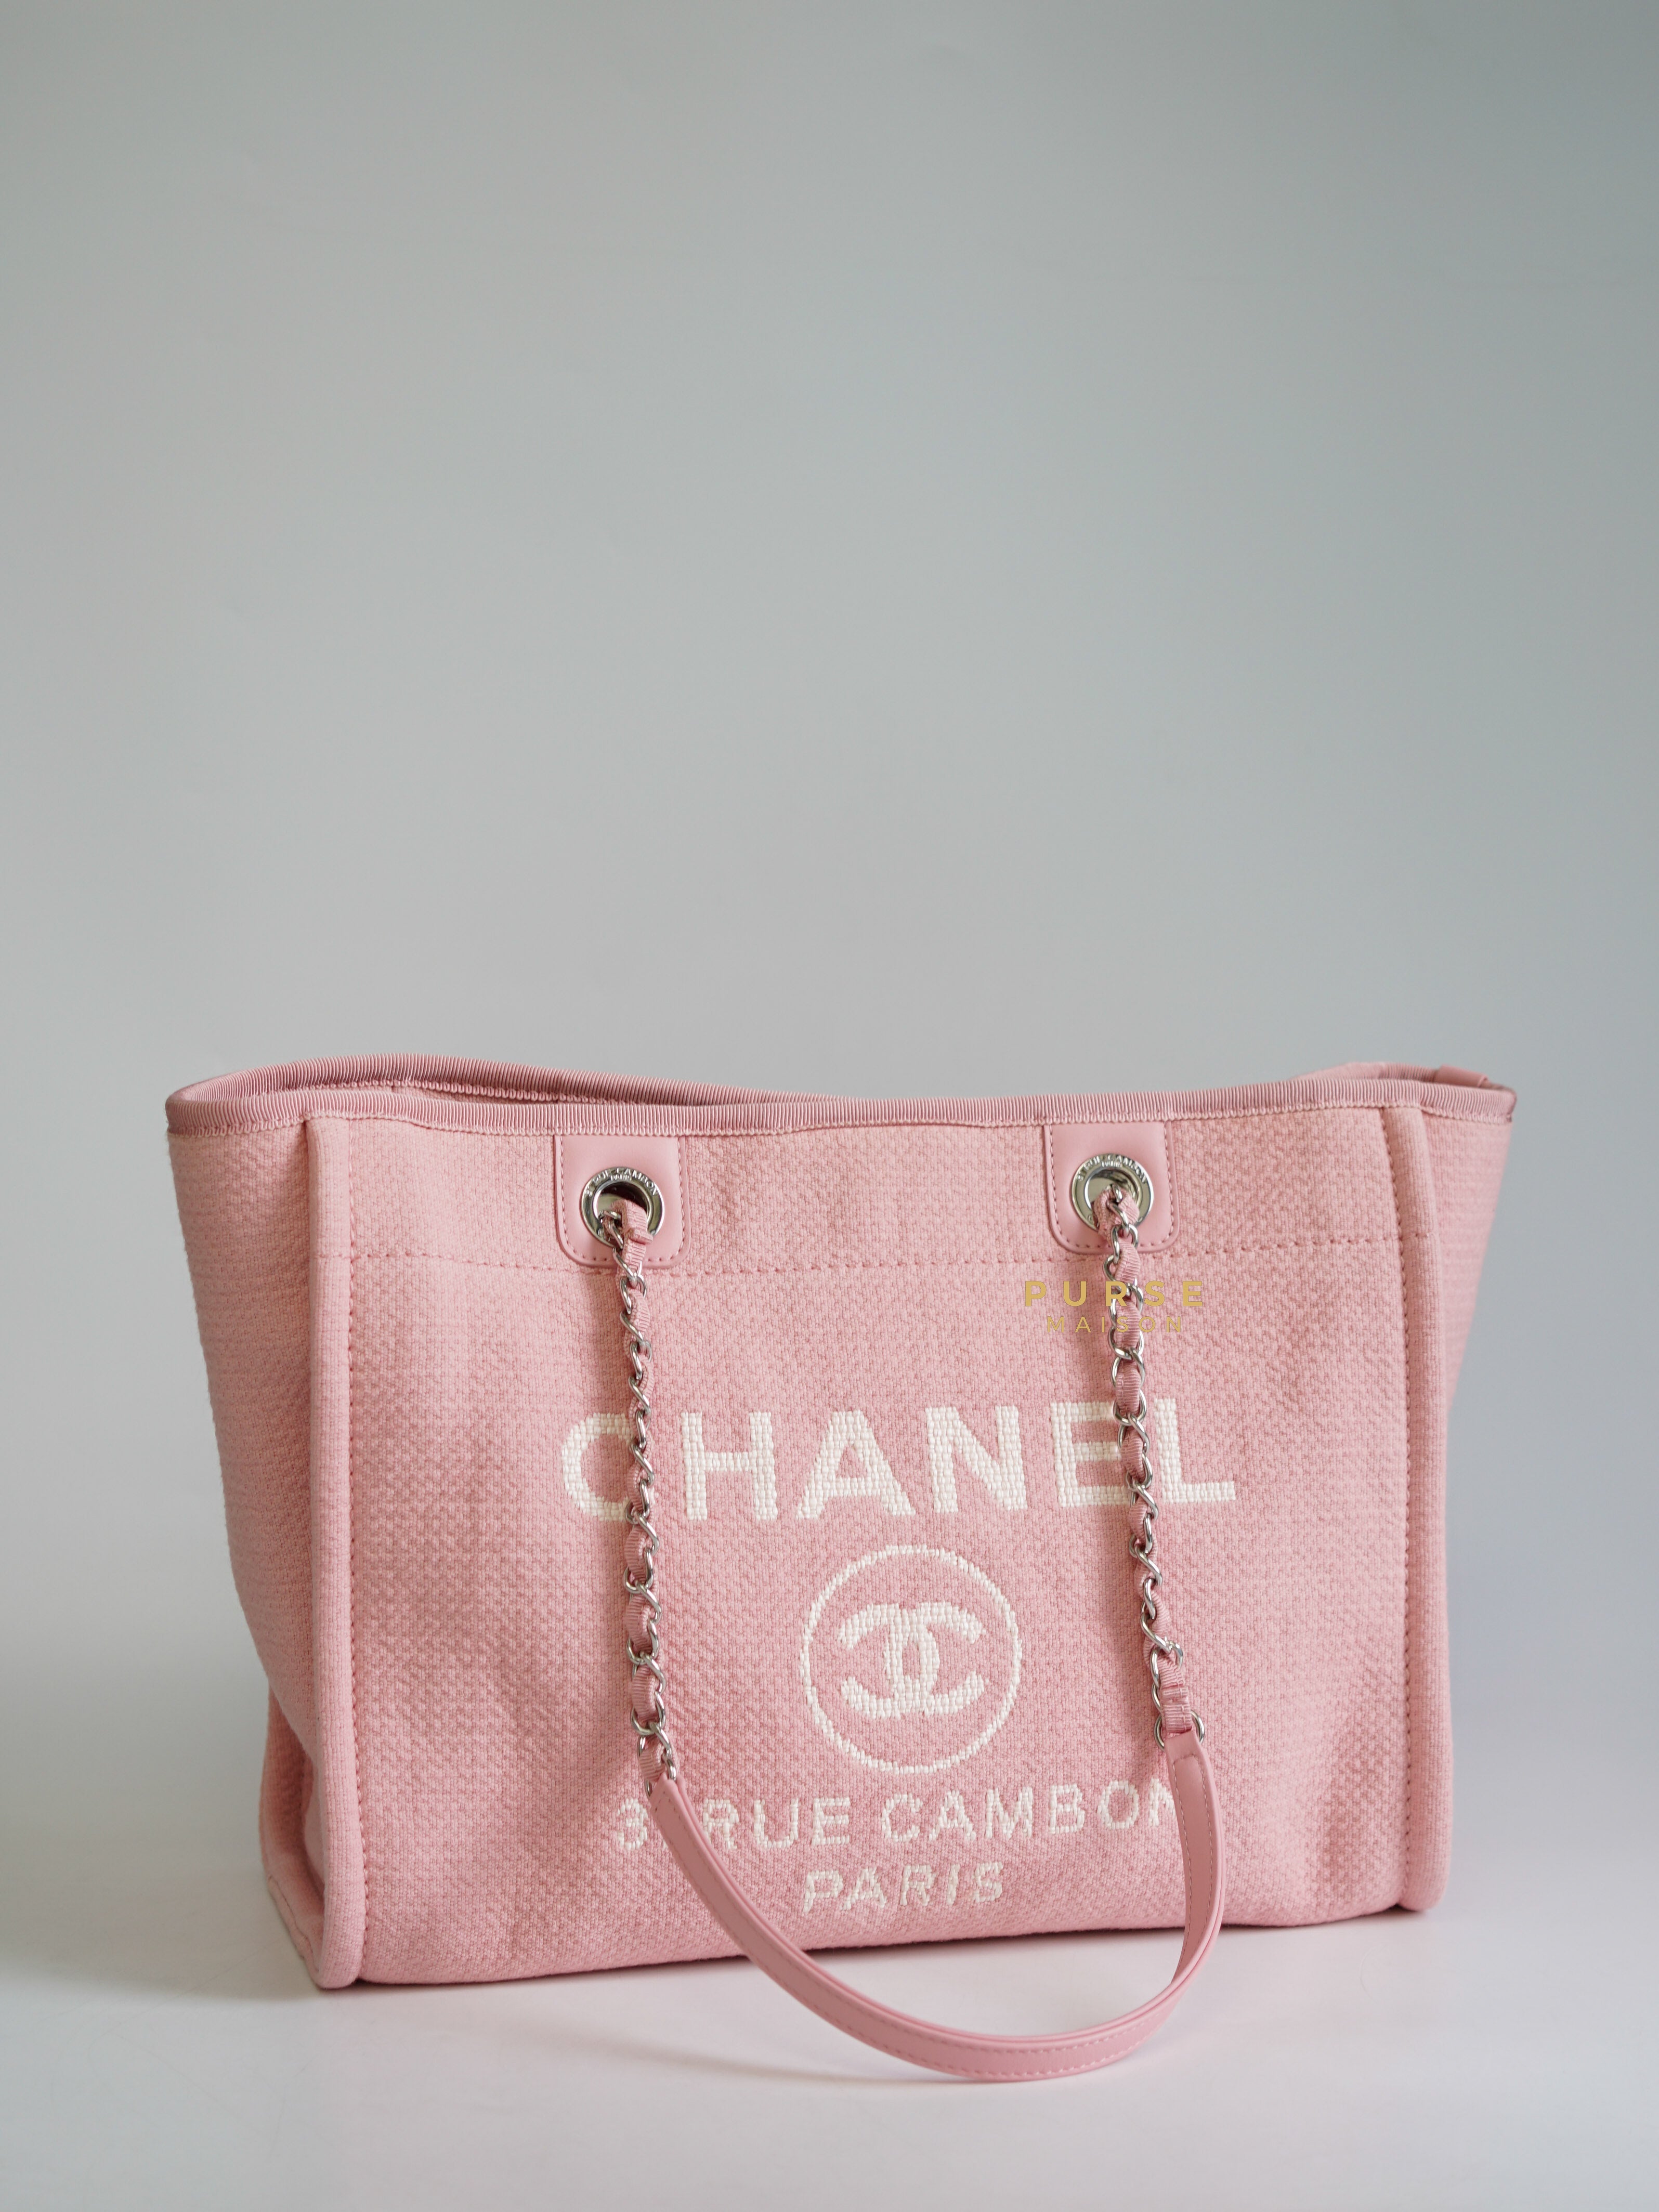 Chanel Deauville Tote Small Pink Bag (Microchip) | Purse Maison Luxury Bags Shop